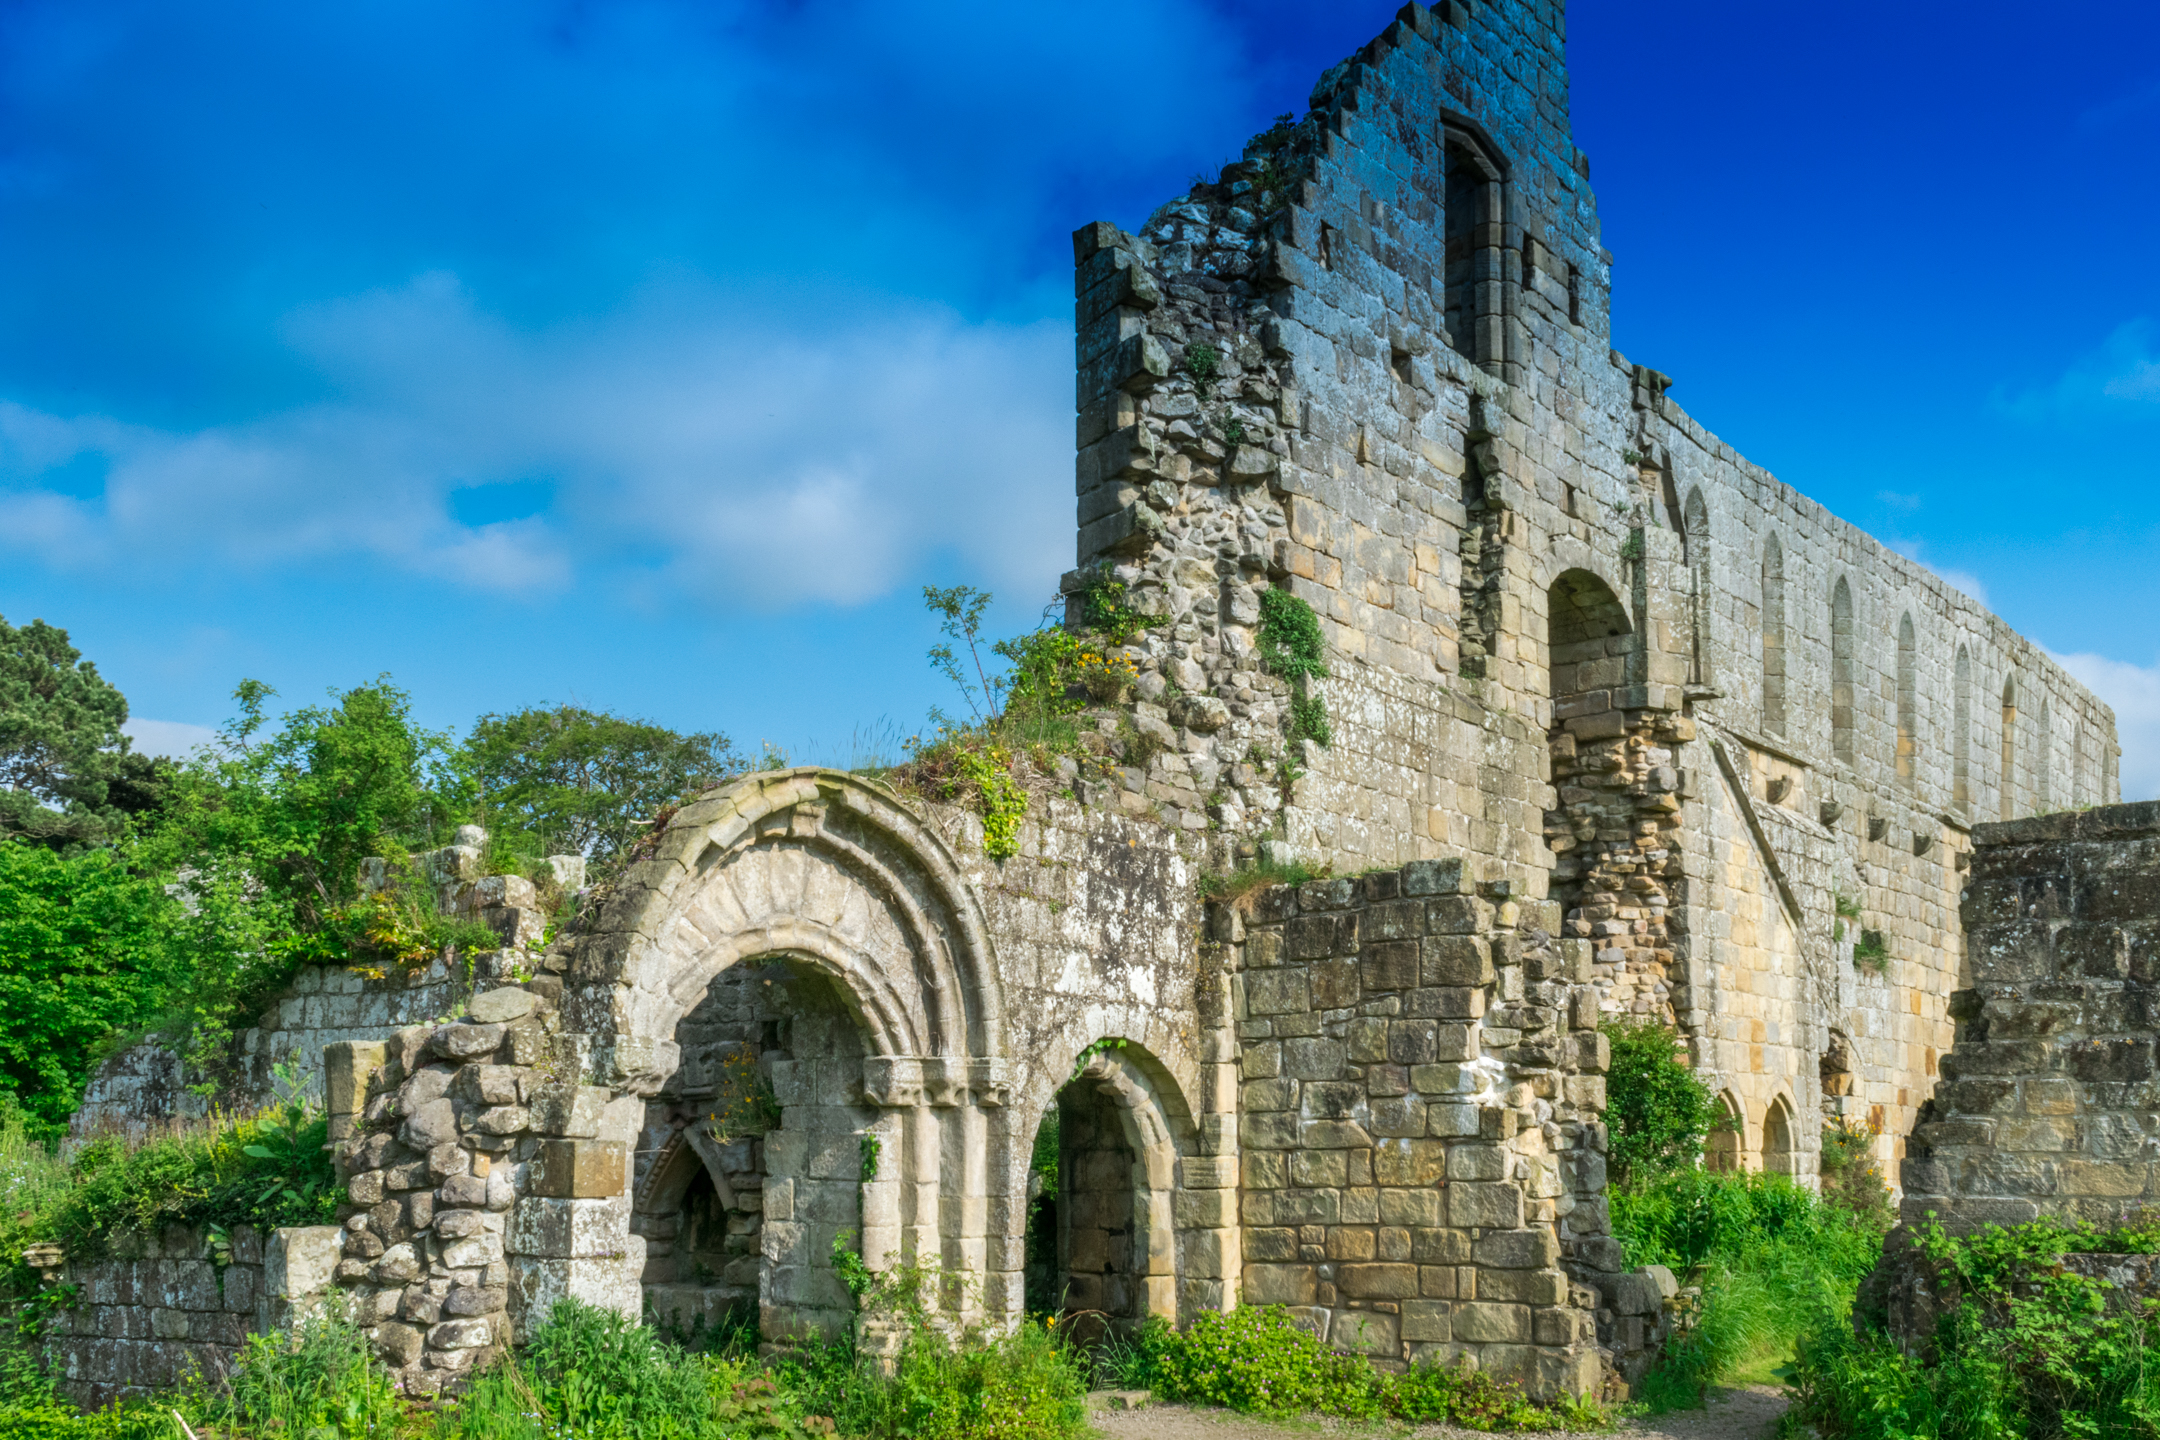 Founded in 1146, Jervaulx Abbey was once a great Cistercian monastery.